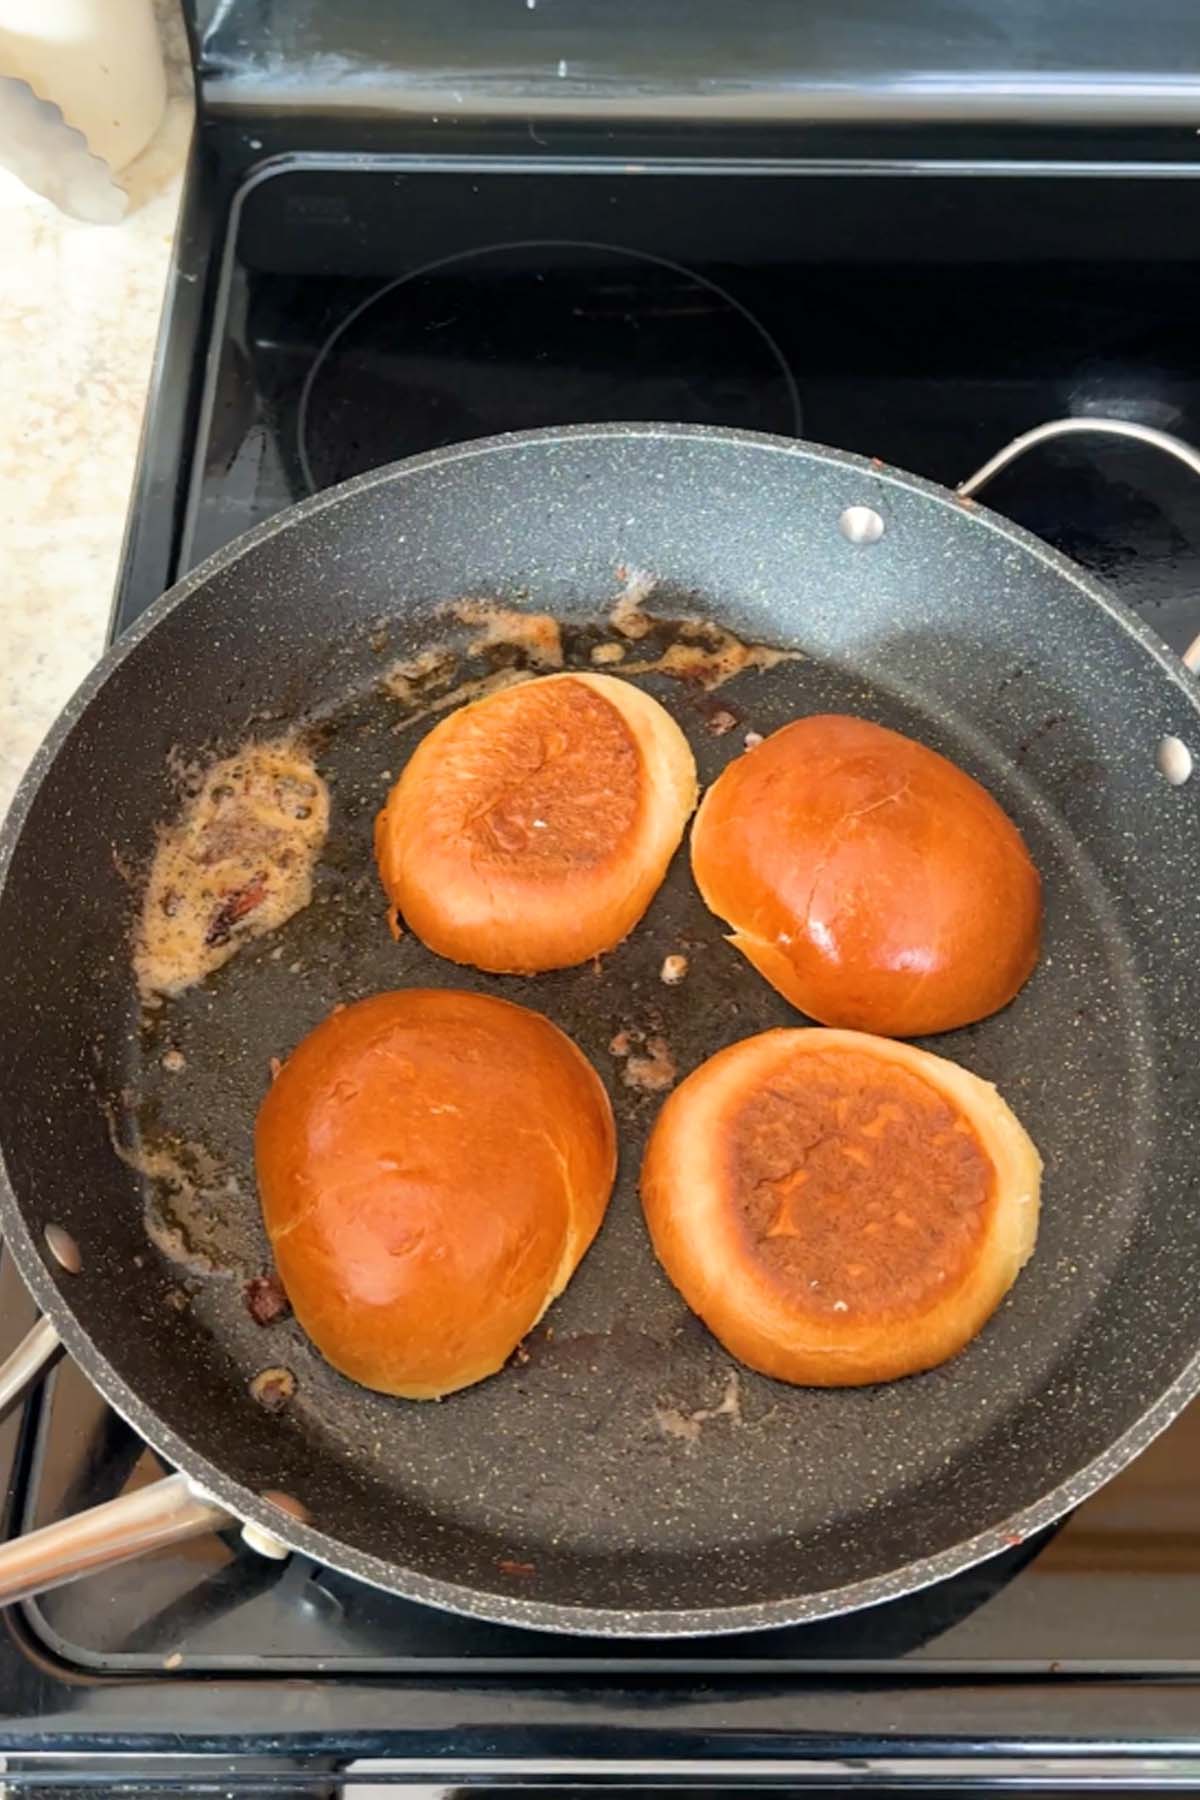 Burger buns are toasted in a skillet.